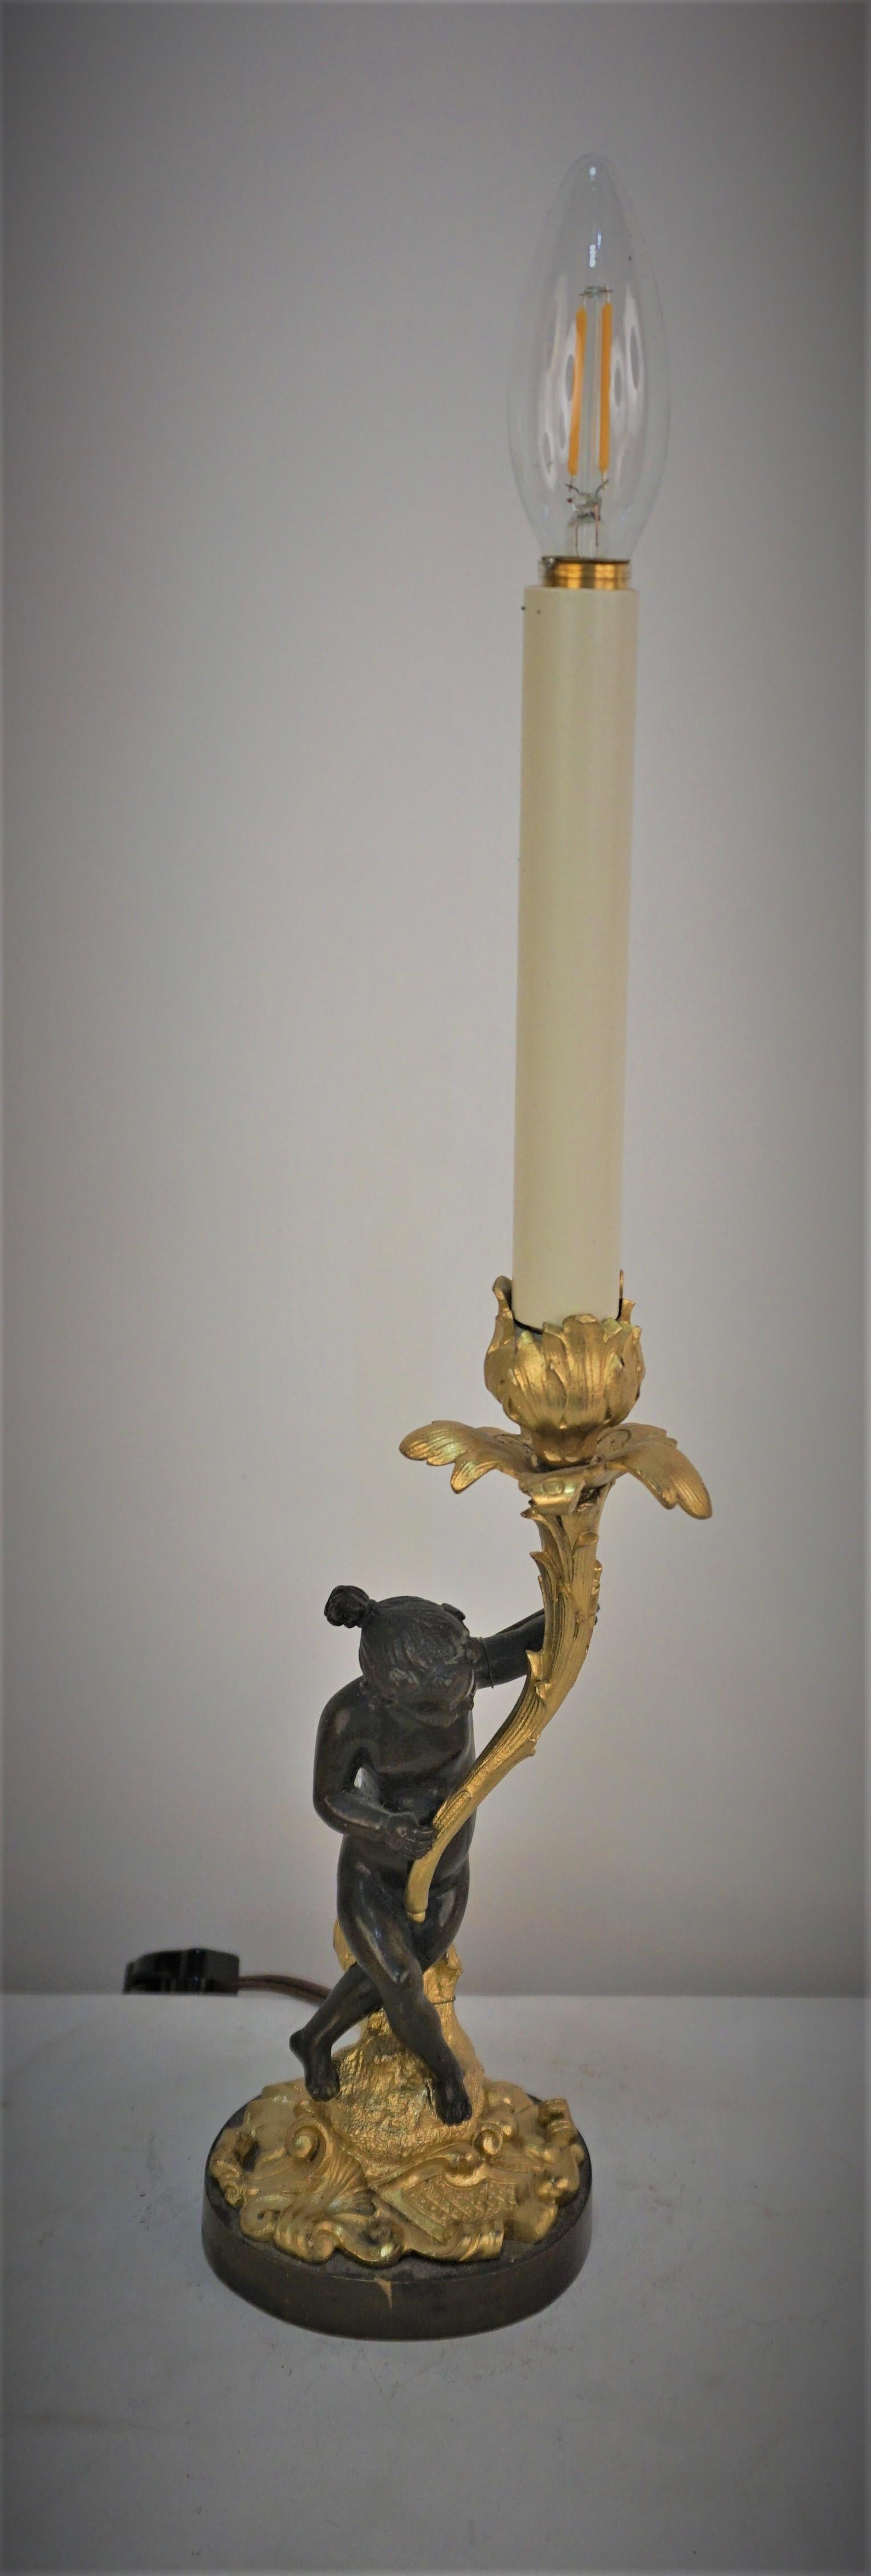 French 19th Century Gilt and Oxidized Bronze Candlestick Lamp  For Sale 8